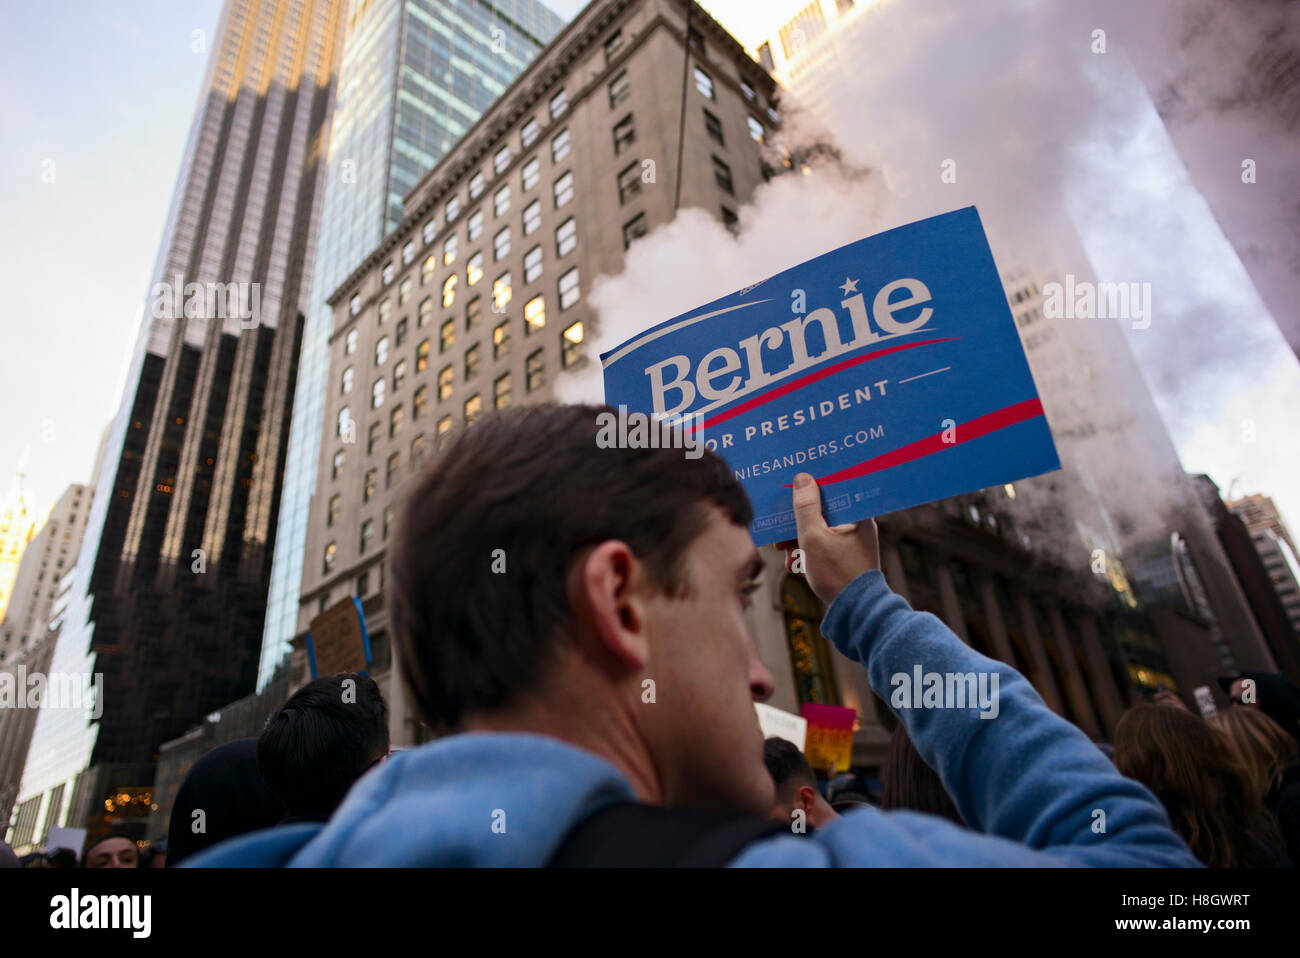 New York, USA. November 12, 2016. A man with a Bernie Sanders campaign sign was part of a protest outside the Trump Tower against the election of Donald Trump as the 45th U.S. president. Credit:  Joseph Reid/Alamy Live News Stock Photo